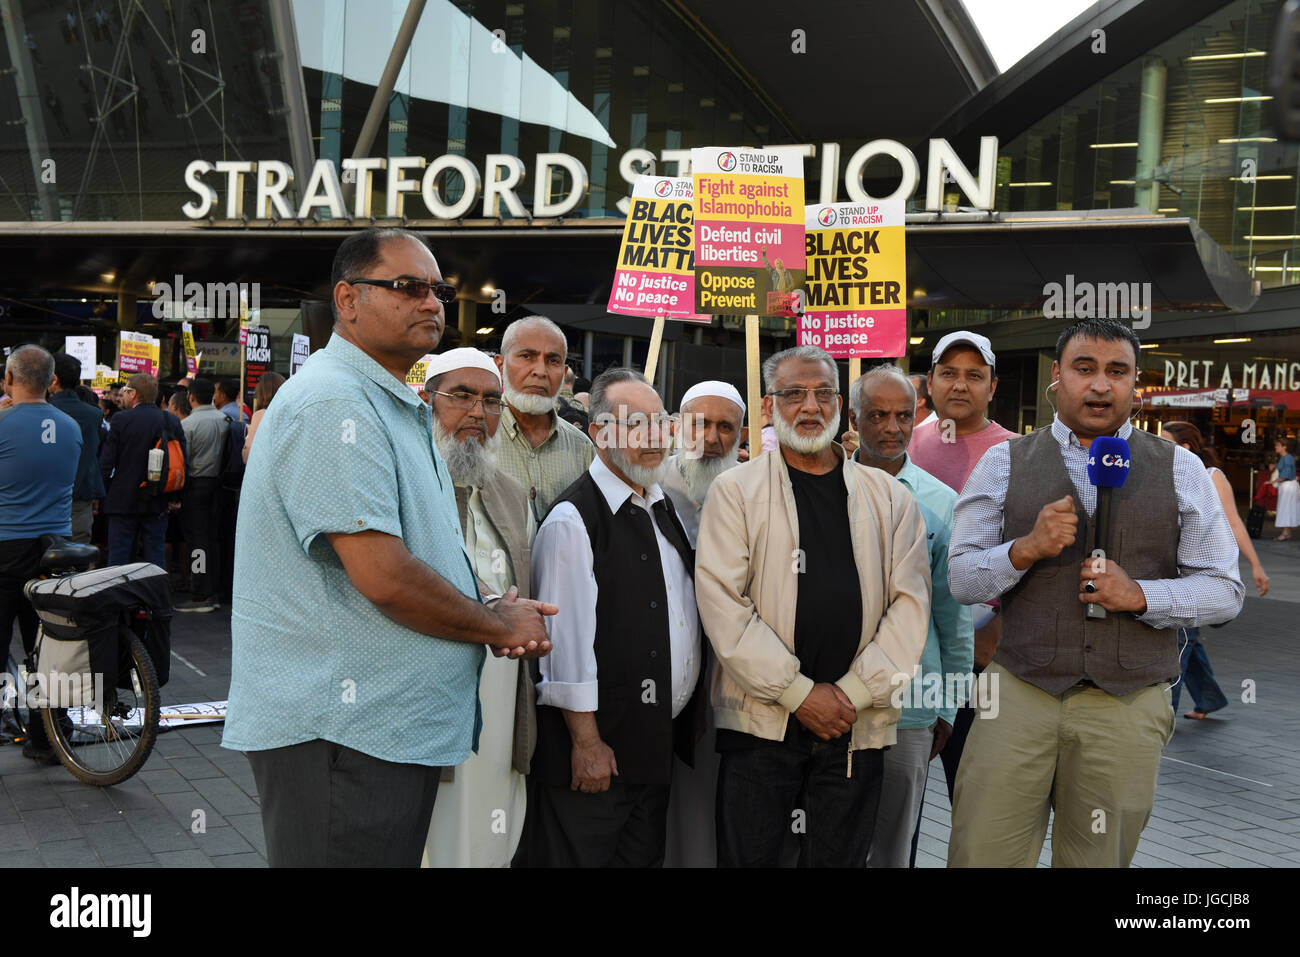 London, UK. 05th JUL 2017. 'STOP ACID ATTACKS' emergency protest outside the Stratford station in East London. Protesters gathered to protest against the recent acid attacks and increasing Islamophobia. C44 UK News journalist is reporting on the protest from outside the Stratford Station. Credit: ZEN - Zaneta Razaite / Alamy Live News Stock Photo